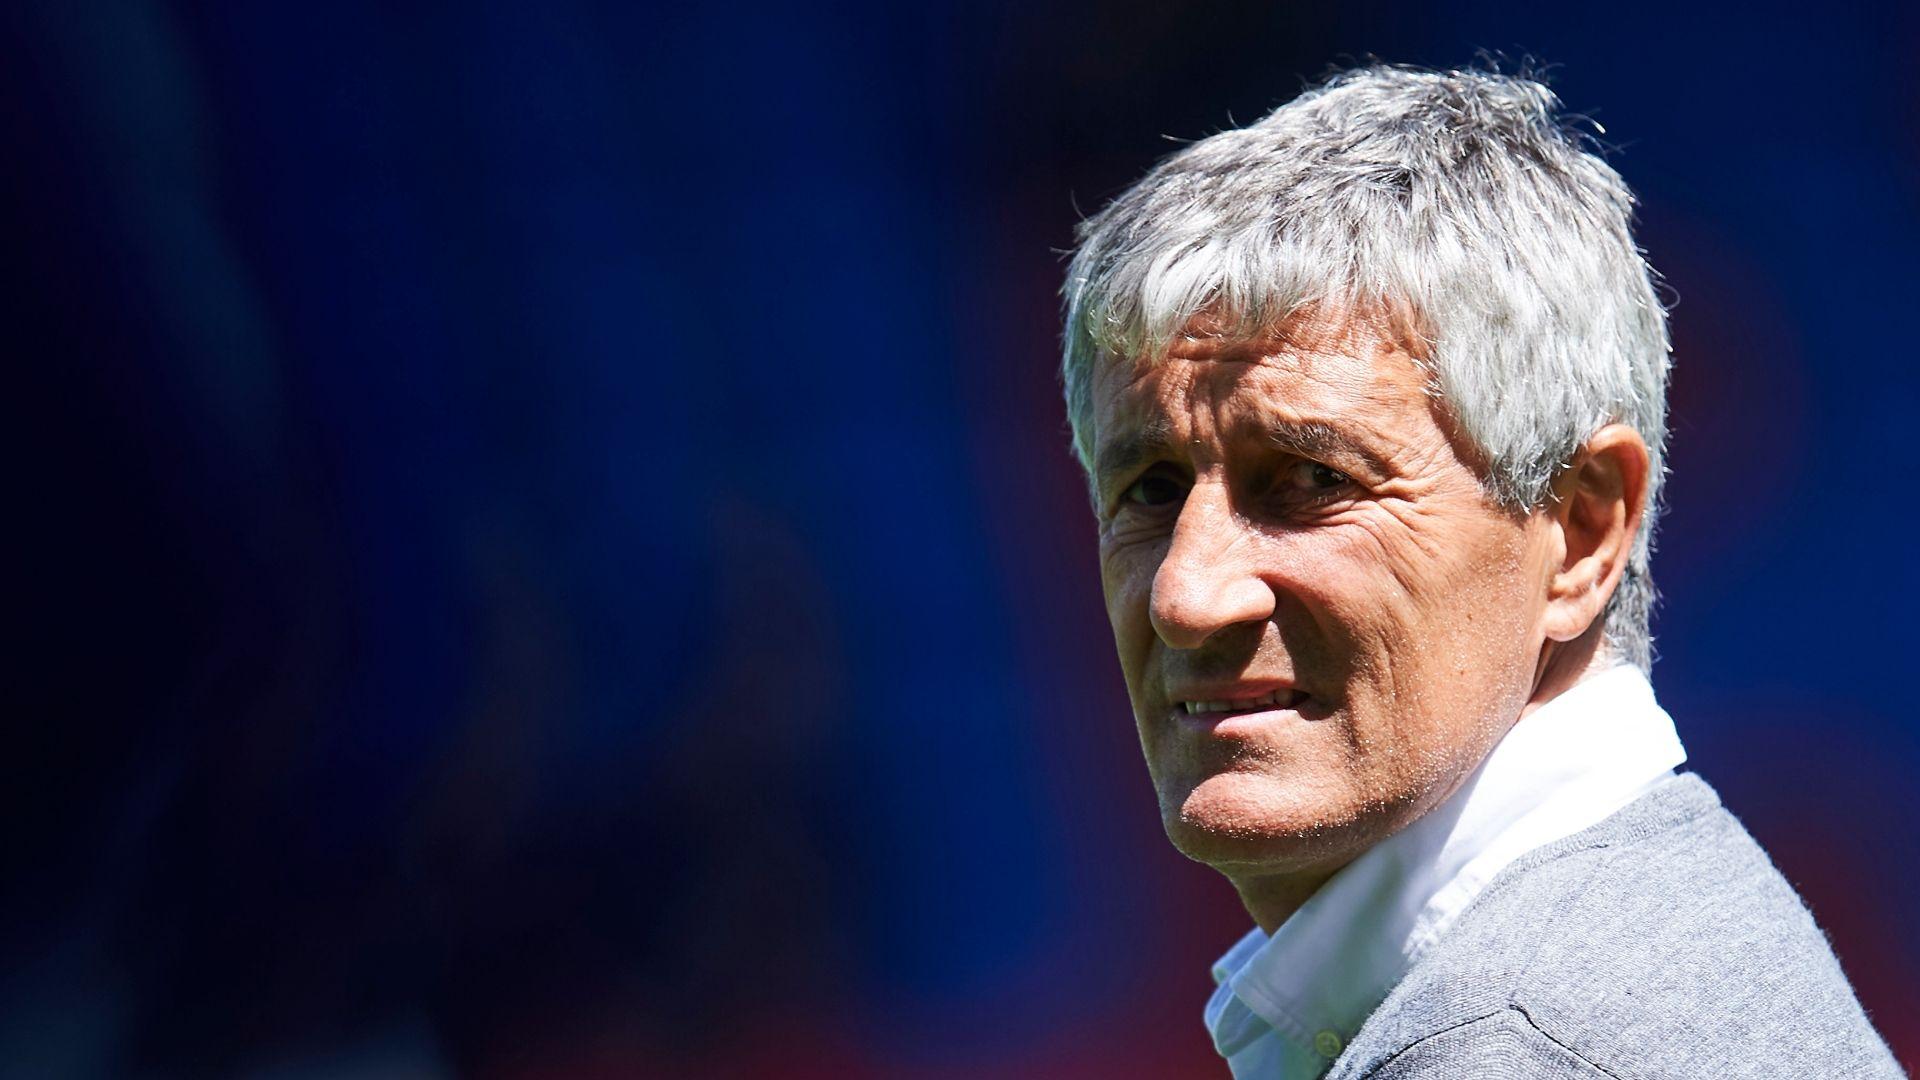 Who is Barcelona's reported new manager, Quique Setien